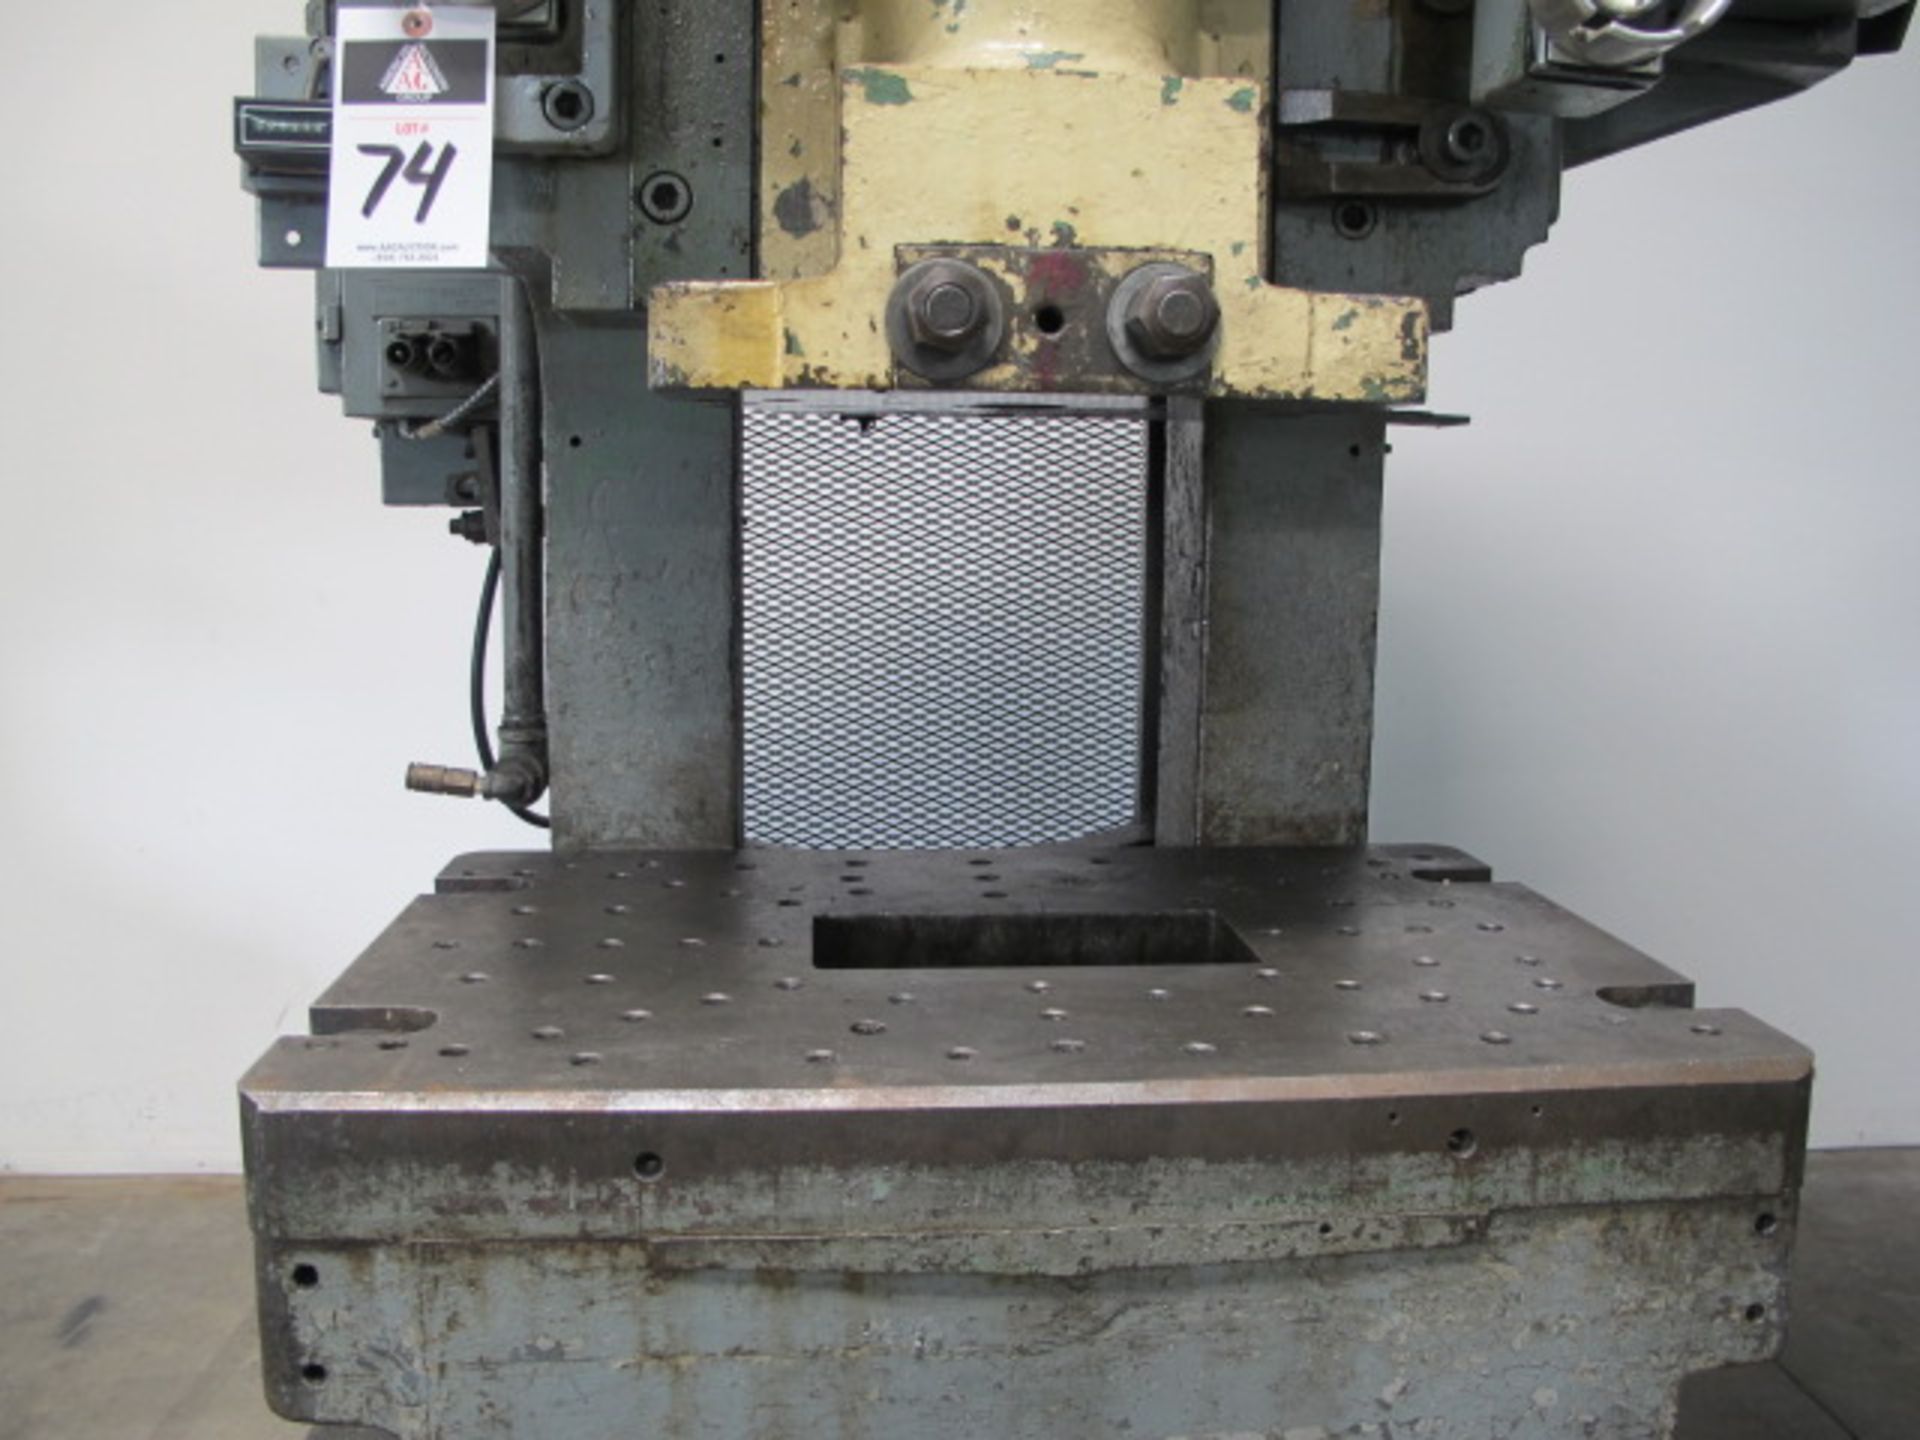 Bliss C-60 60-Ton OBI Stamping Press s/n H65677 w/ Pneumatic Clutch, 21” x 32” Bolster Area, 11” x - Image 5 of 7